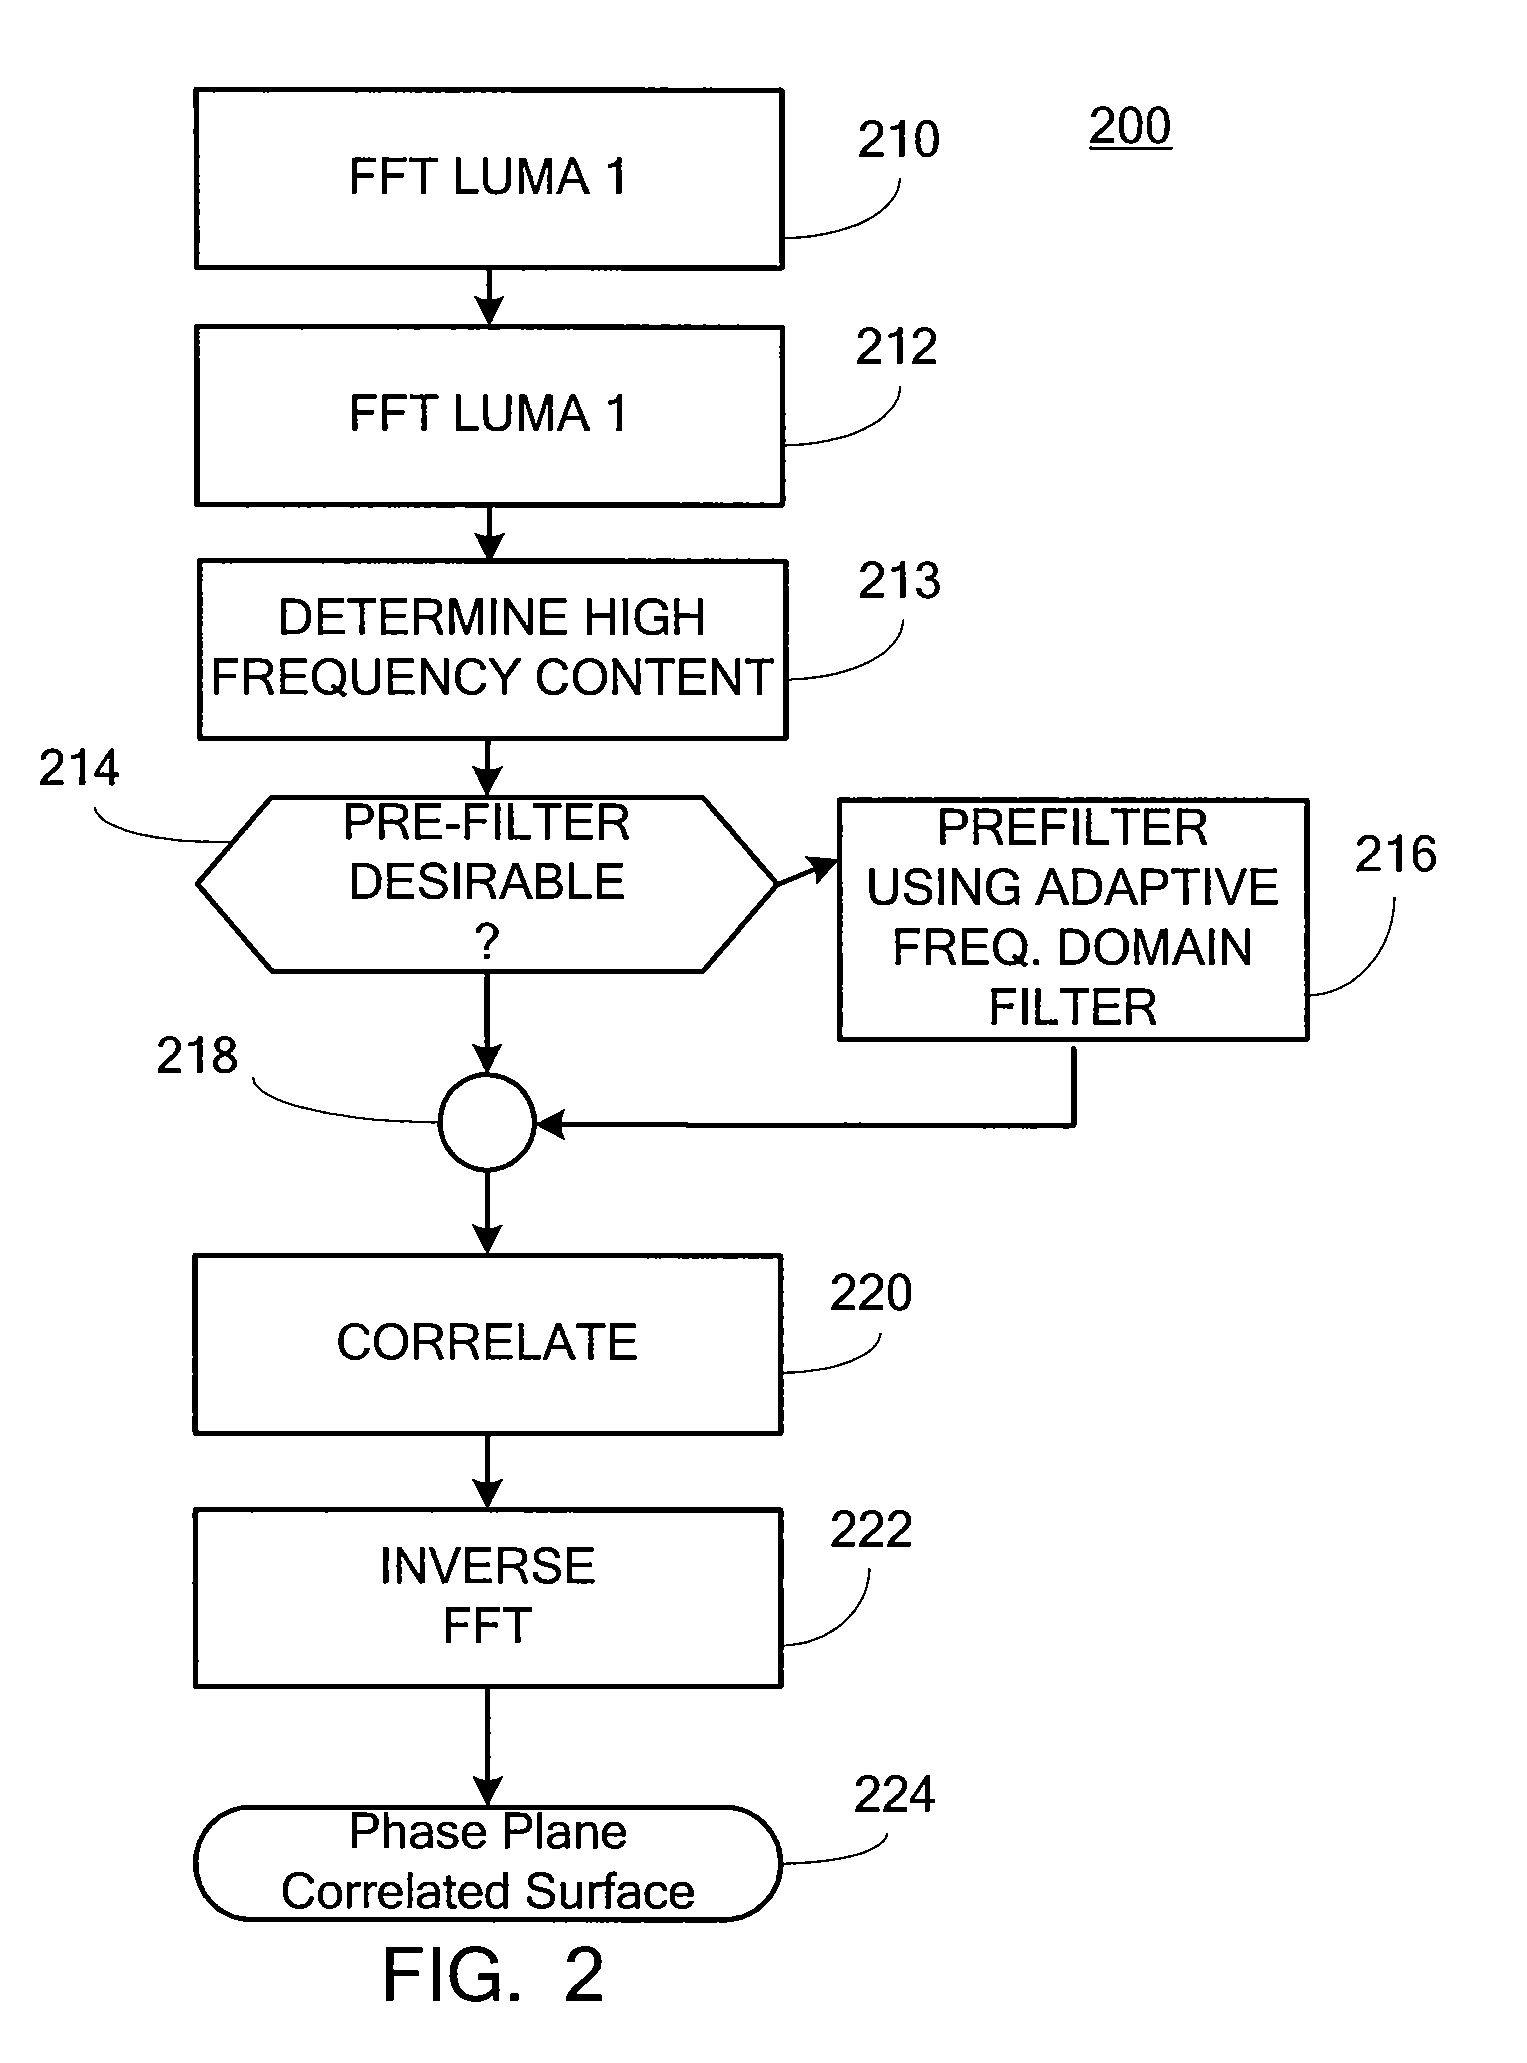 Adaptive frequency domain filtering for phase plane correlation